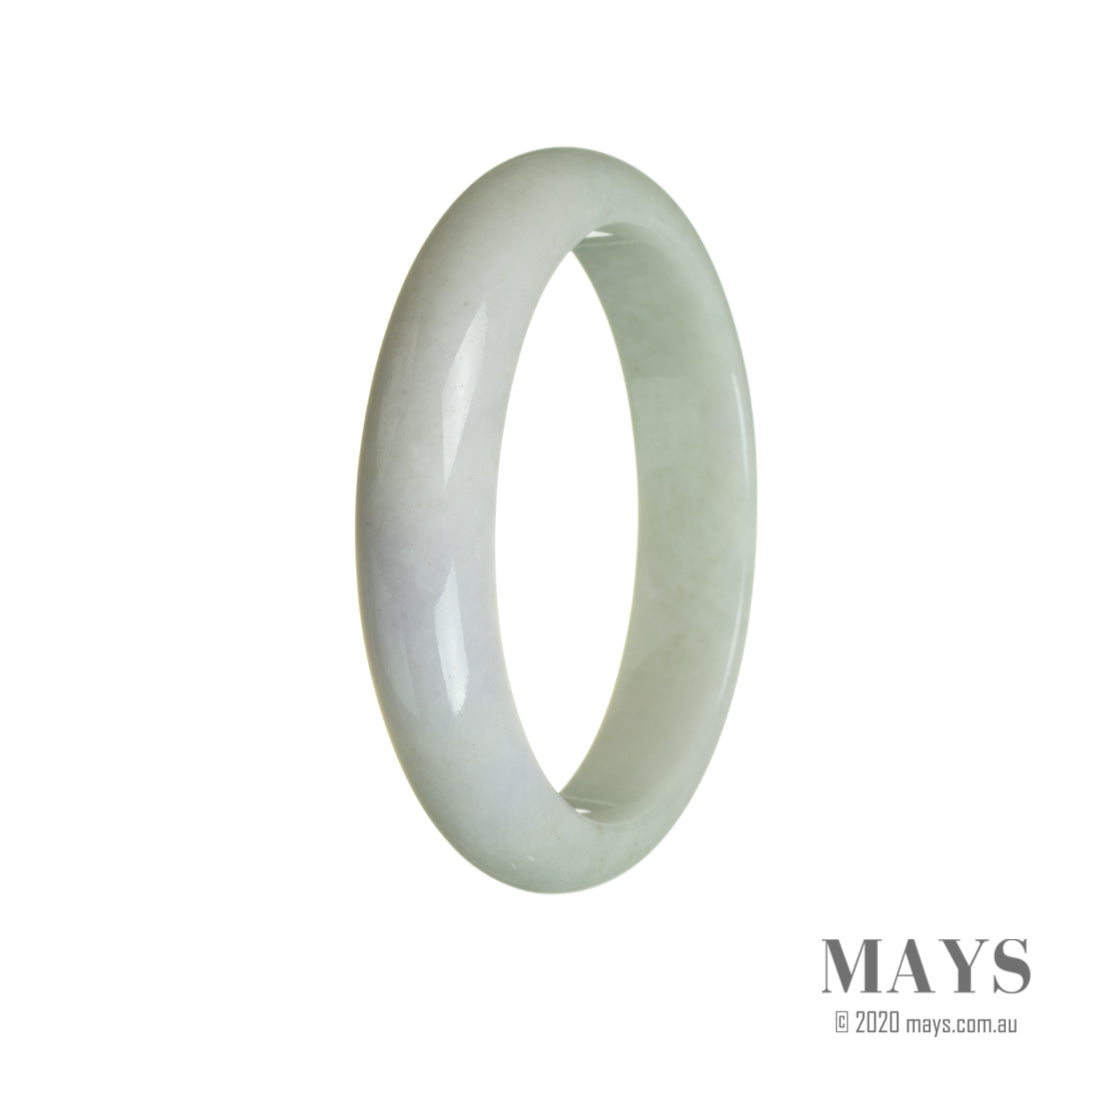 A delicate pale green and lavender jadeite jade bangle bracelet with a half moon design, certified Grade A quality.